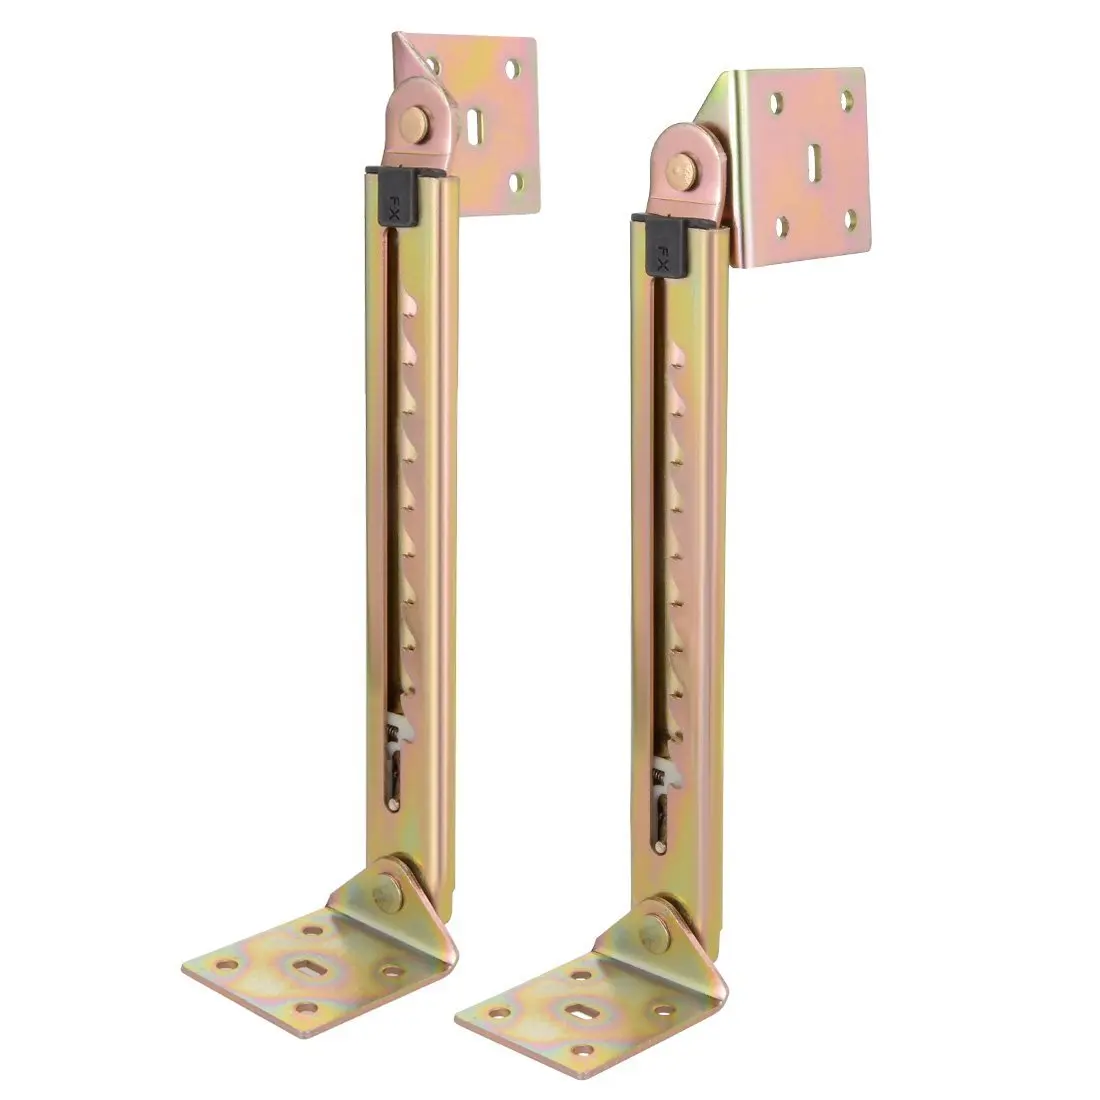 

1 Pair Angle Lifting Rod Desk 10 Gear Adjusting Hinge Angle Hinge WITH Bracket Cabinet Door Lift Pneumatic Support Hardware